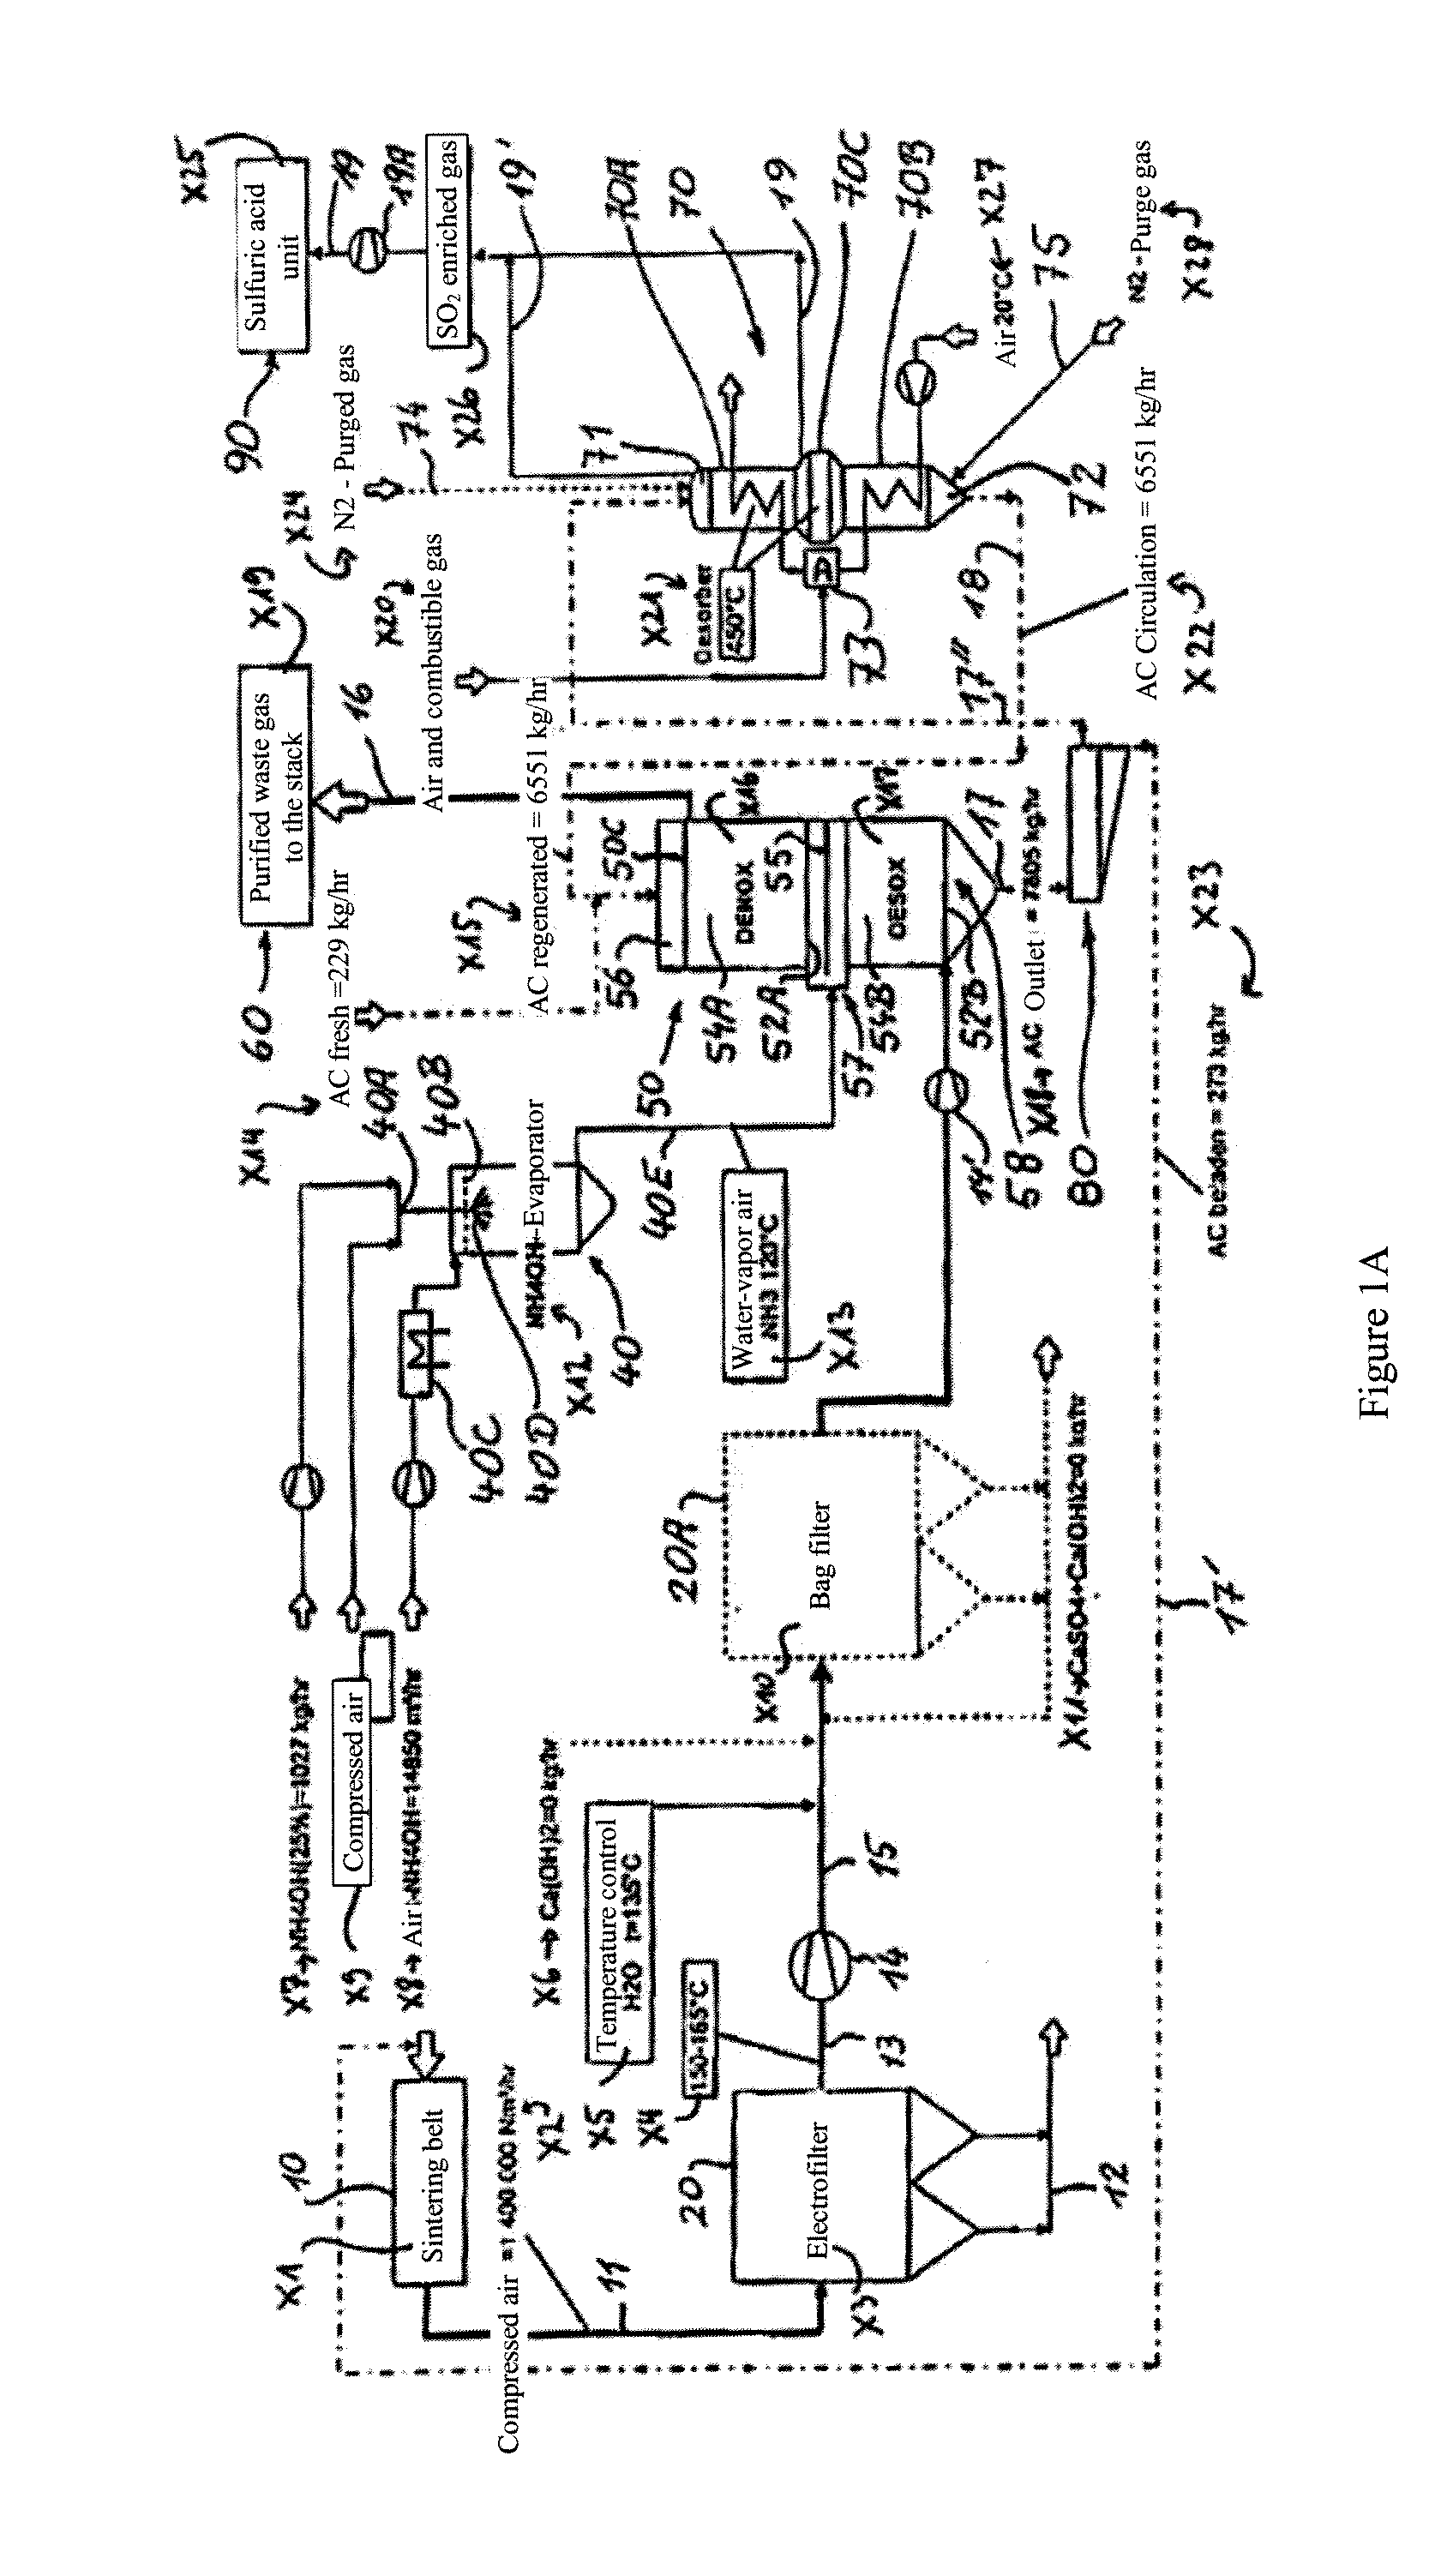 Method and device for purifying the flue gases of a sintering process of ores and/or other material-containing materials in metal production